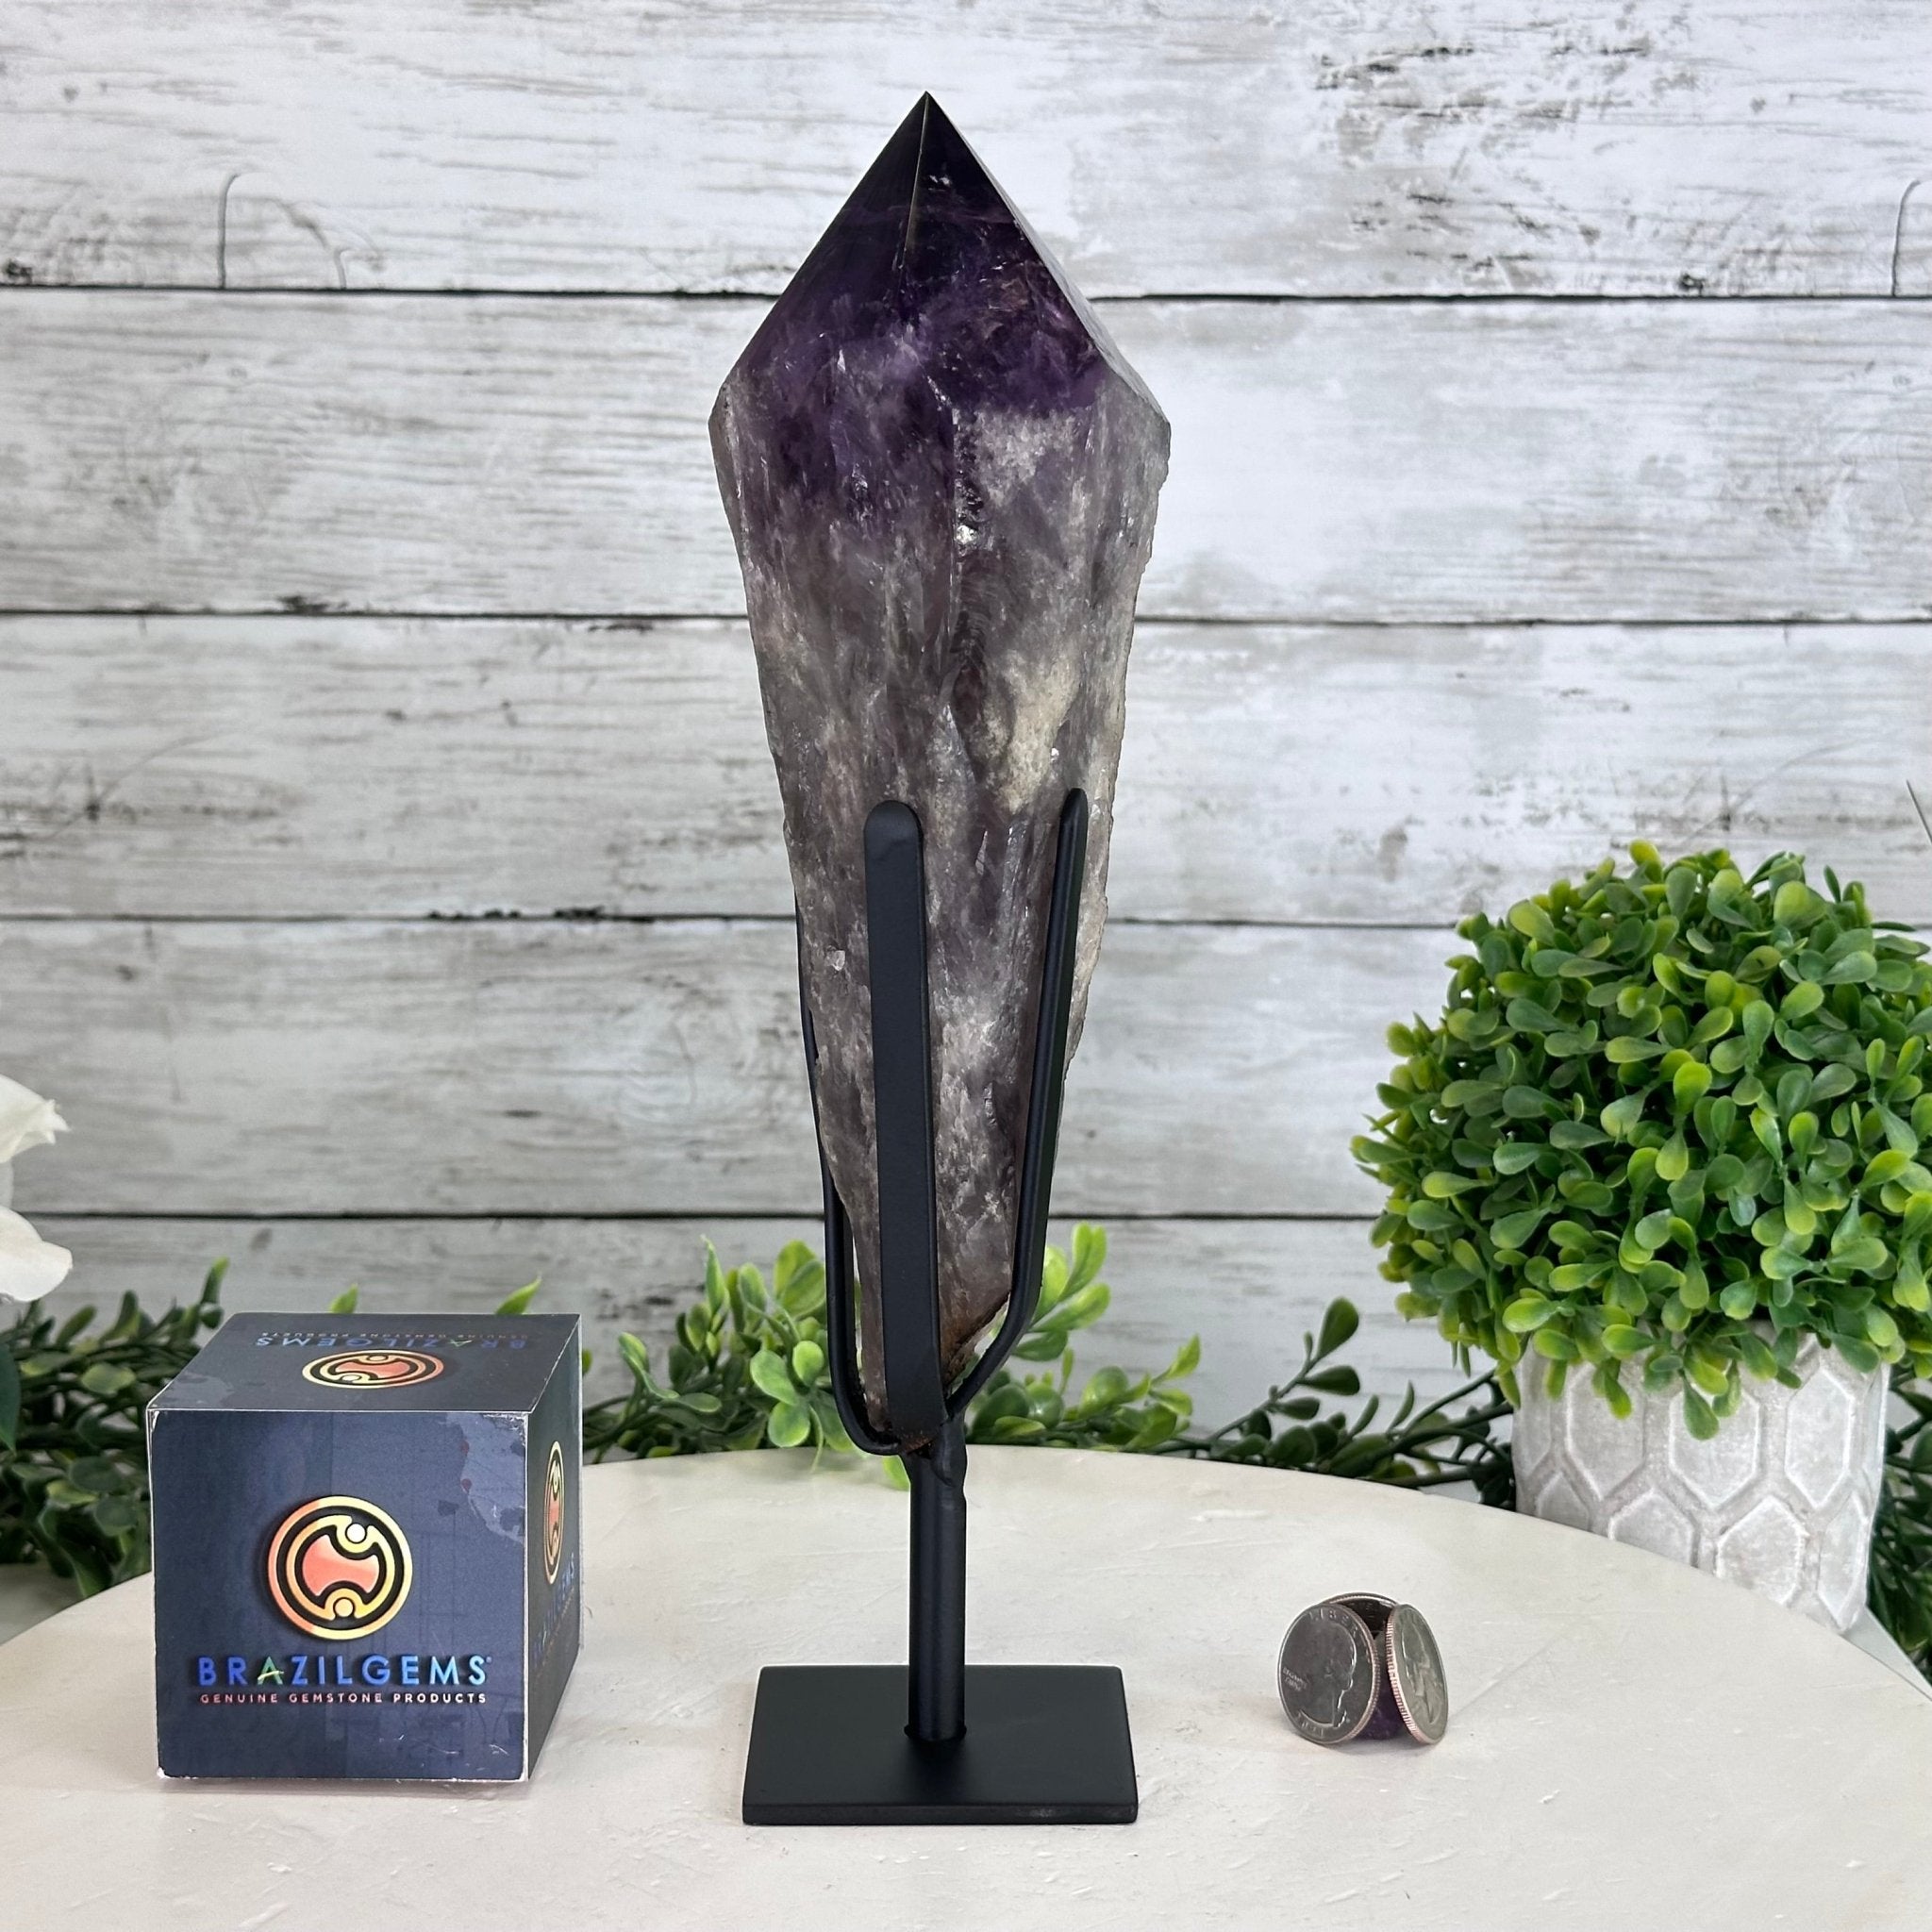 Super Quality Amethyst Wand on a Metal Stand, 2.6 lbs & 11.1" Tall #3123AM-011 - Brazil GemsBrazil GemsSuper Quality Amethyst Wand on a Metal Stand, 2.6 lbs & 11.1" Tall #3123AM-011Clusters on Fixed Bases3123AM-011